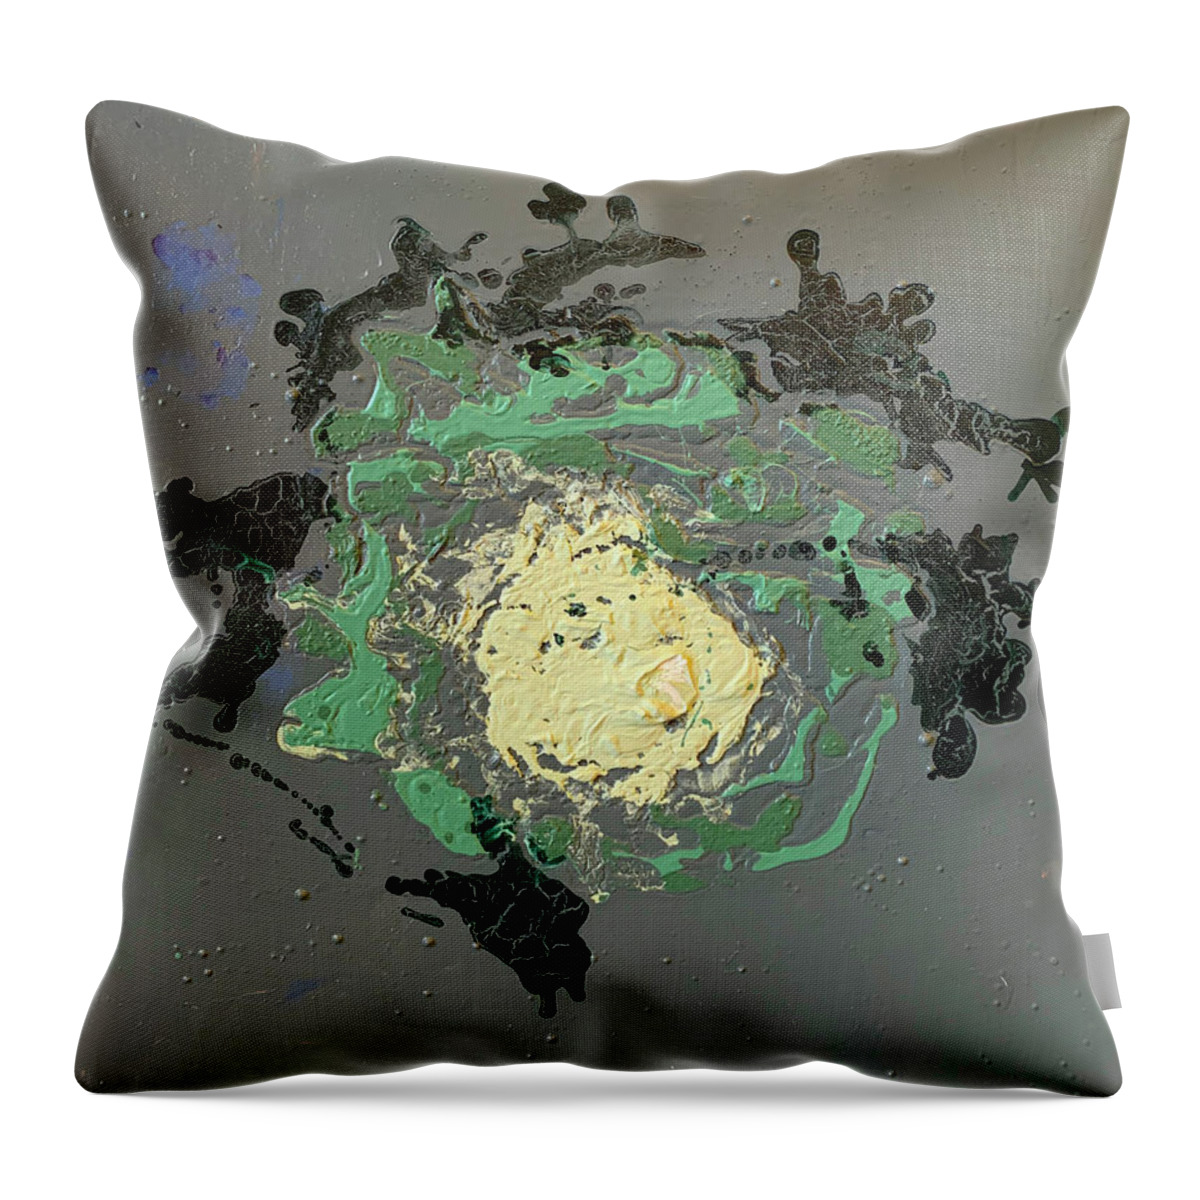 Abstract Throw Pillow featuring the painting Abstrct by Leslie Porter